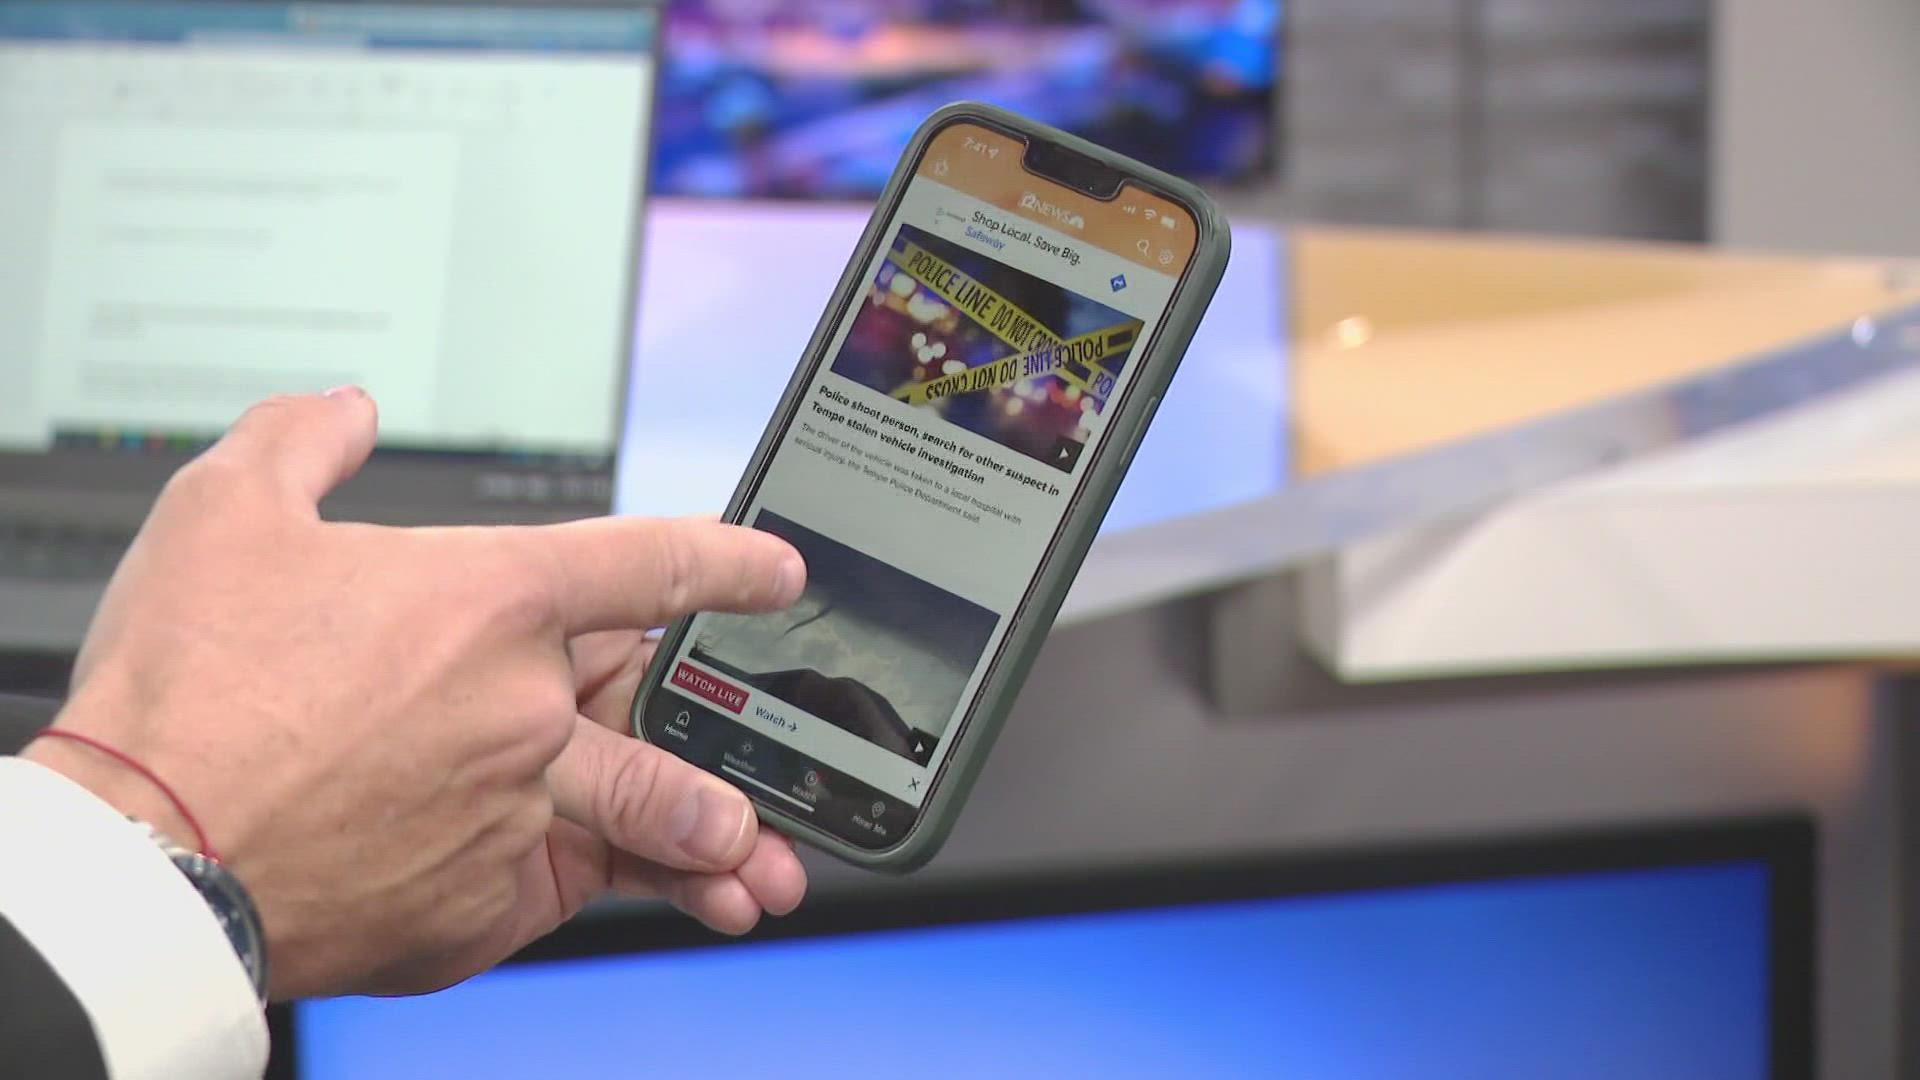 Did you know you can send us photos and videos from the 12News app? If you take a photo or video you want to share with us, here's how to do it.